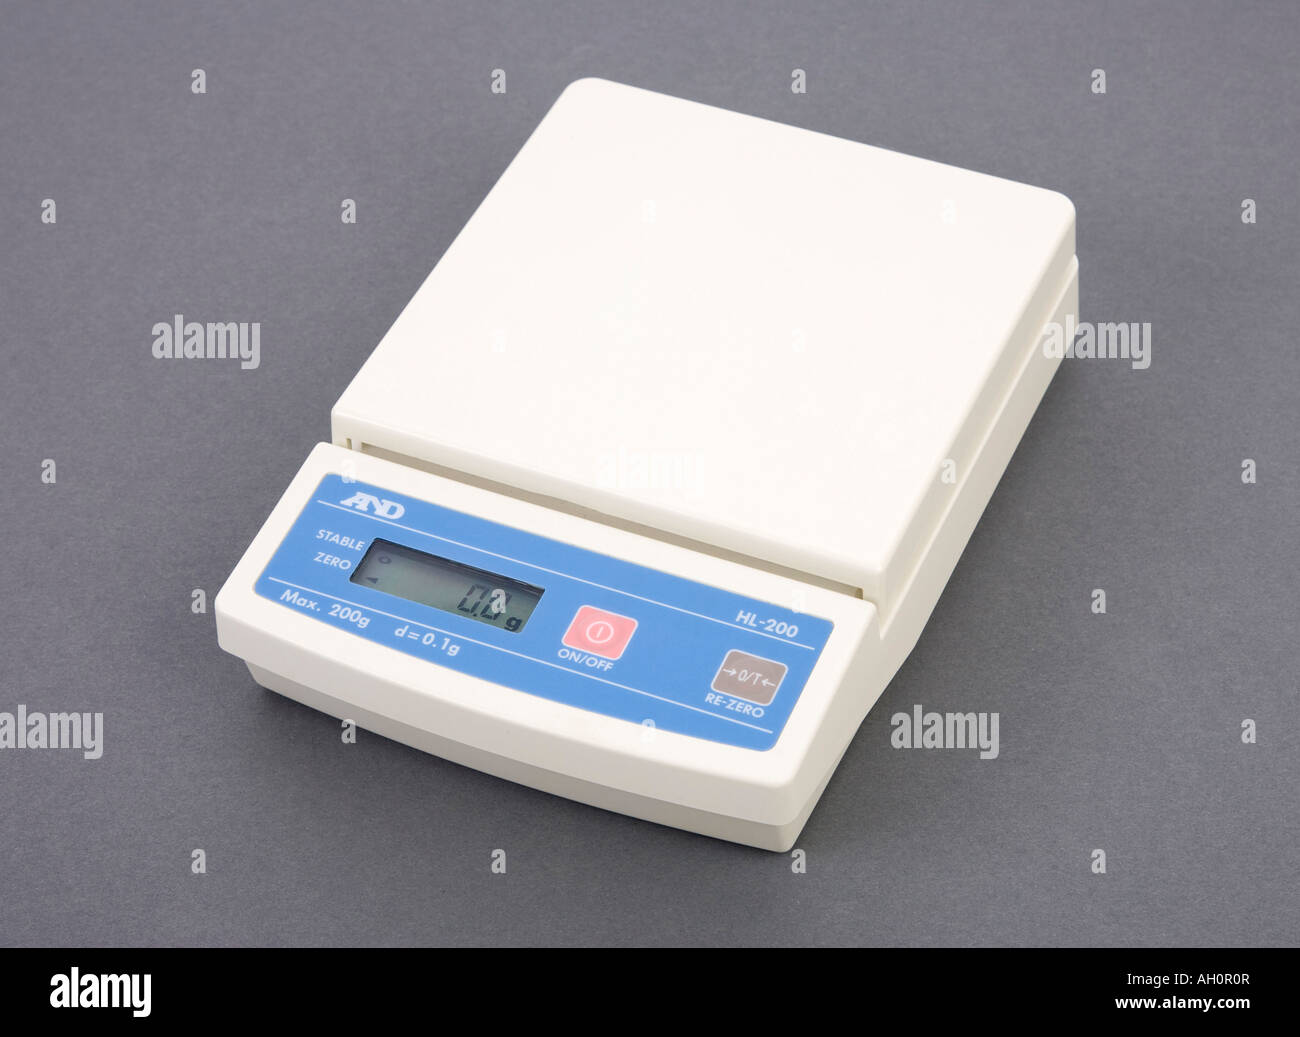 digital balance with a resolution of 0.1 grams and capacity 200 grams Stock Photo